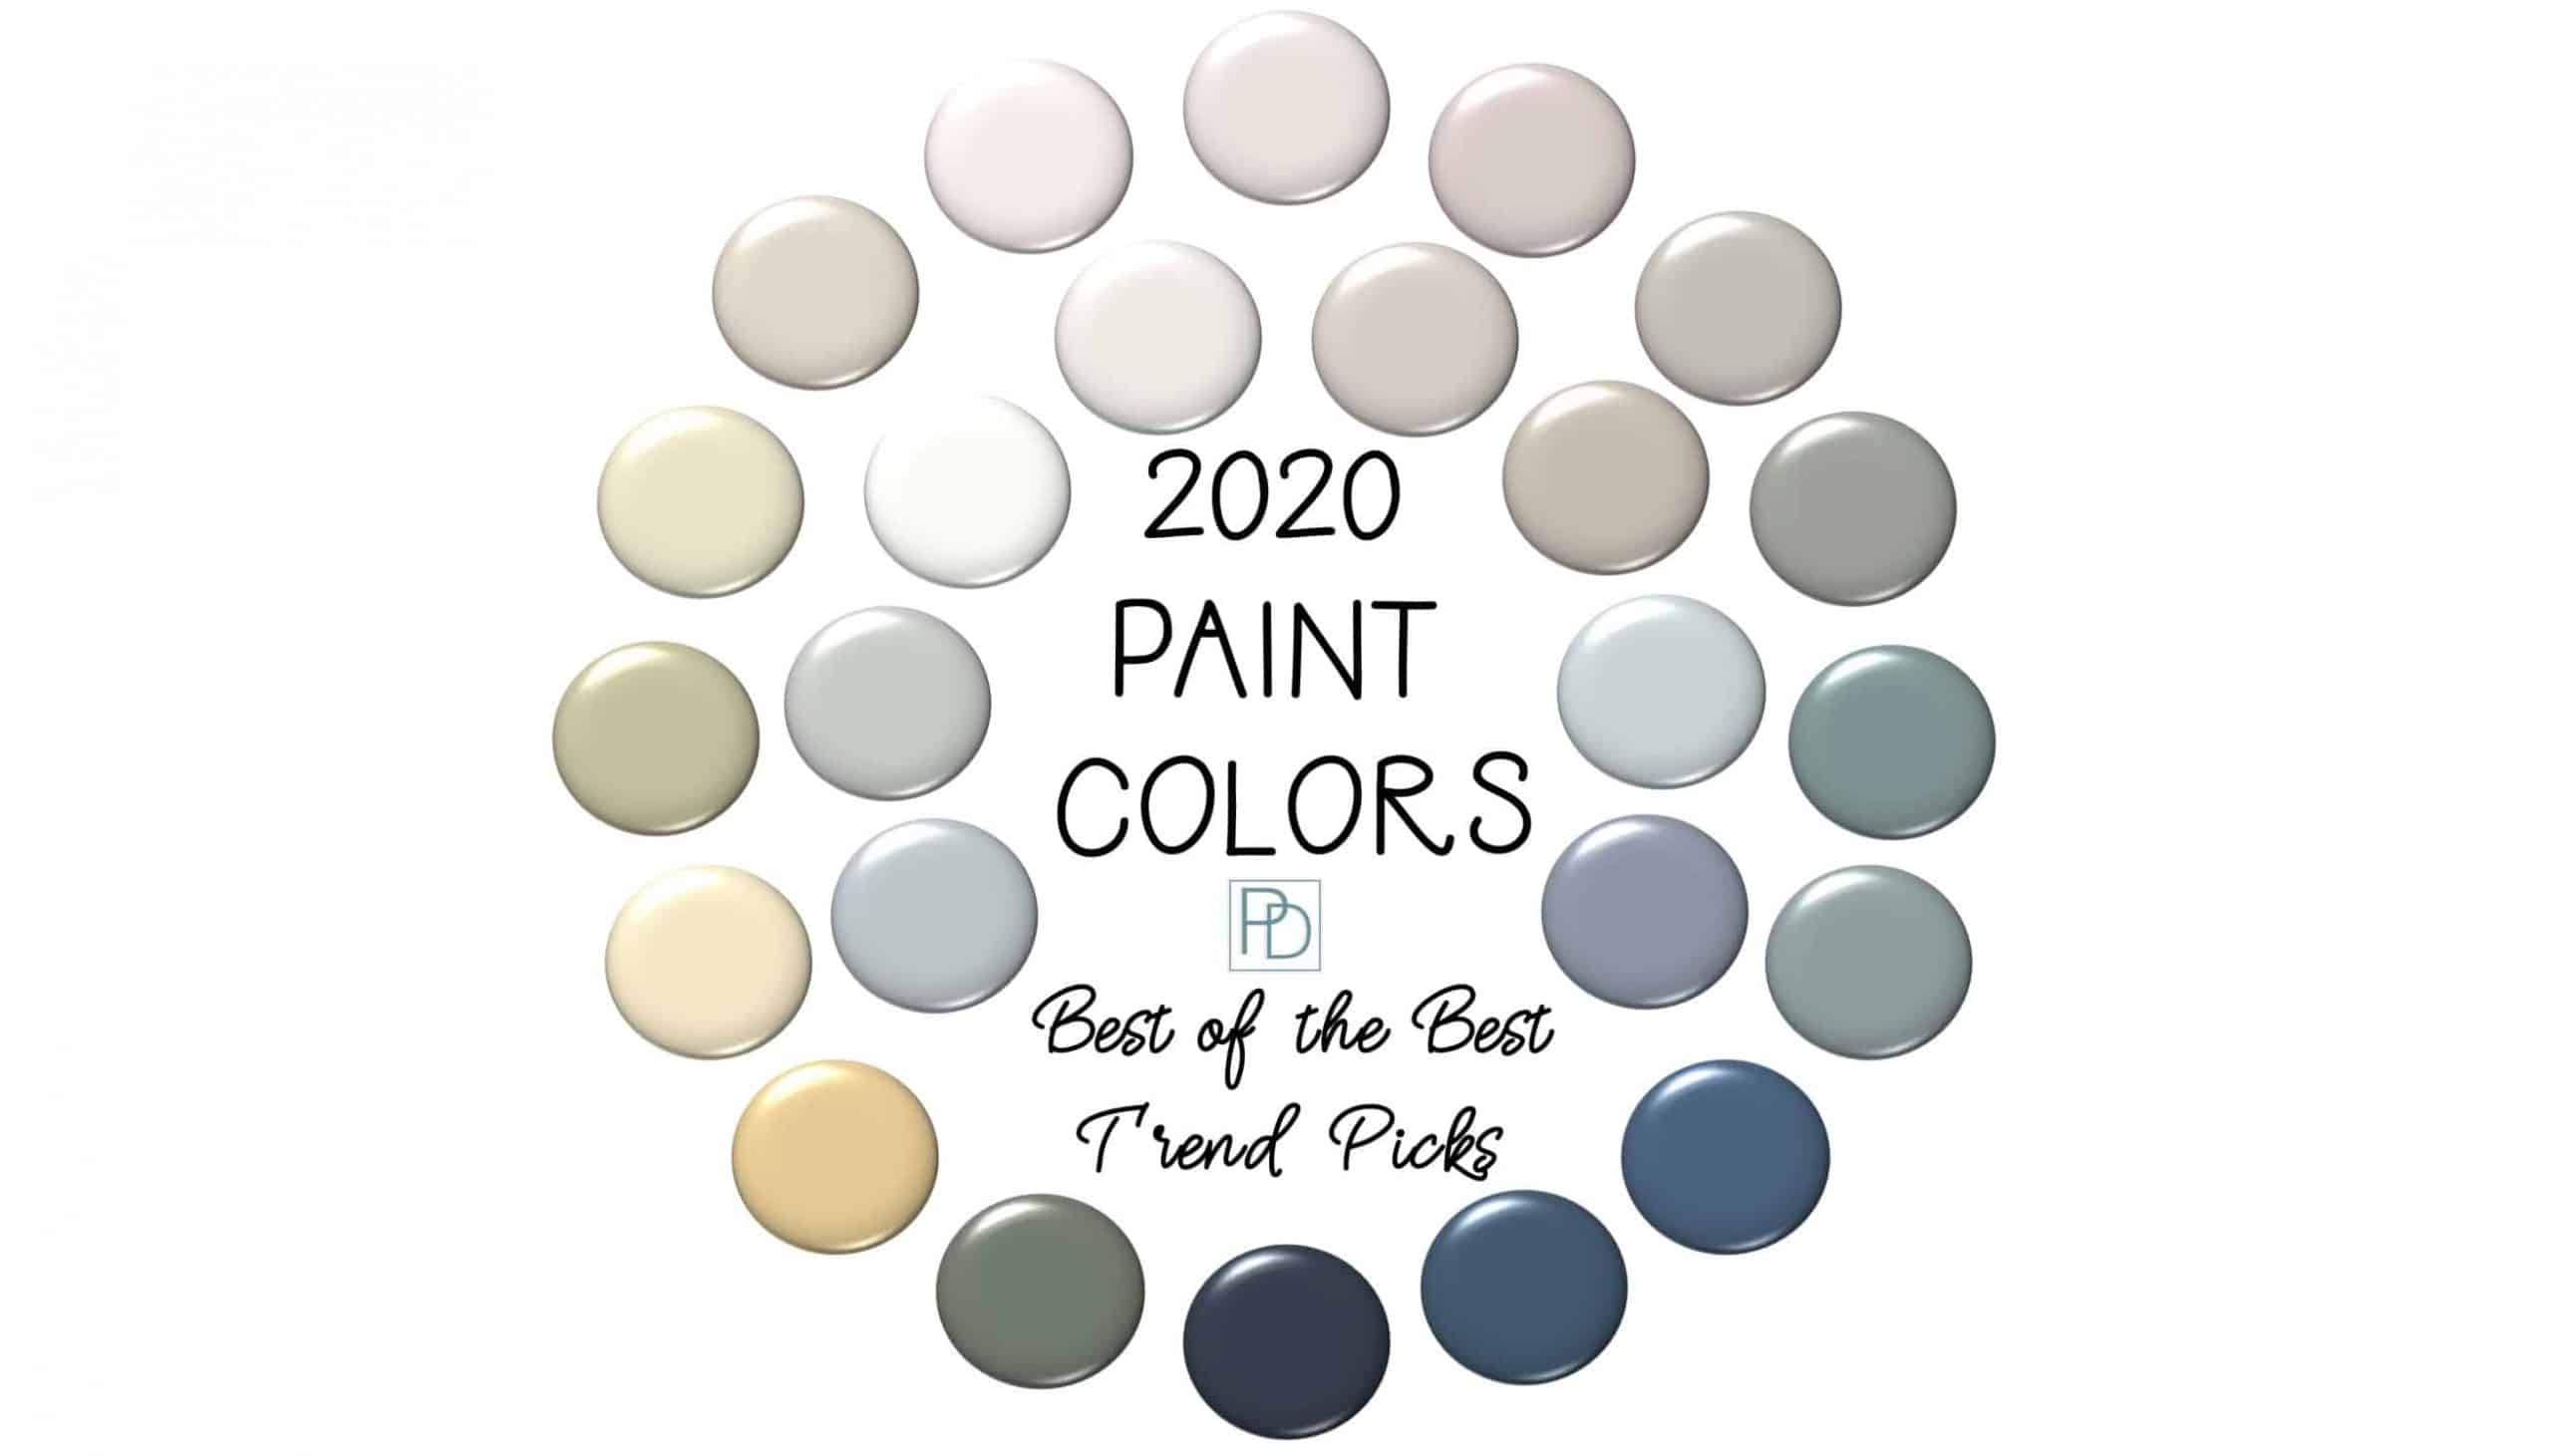 2020 Paint Color Trends 24 Best Of The Best Picks Porch Daydreamer,United Process Services Voicemail